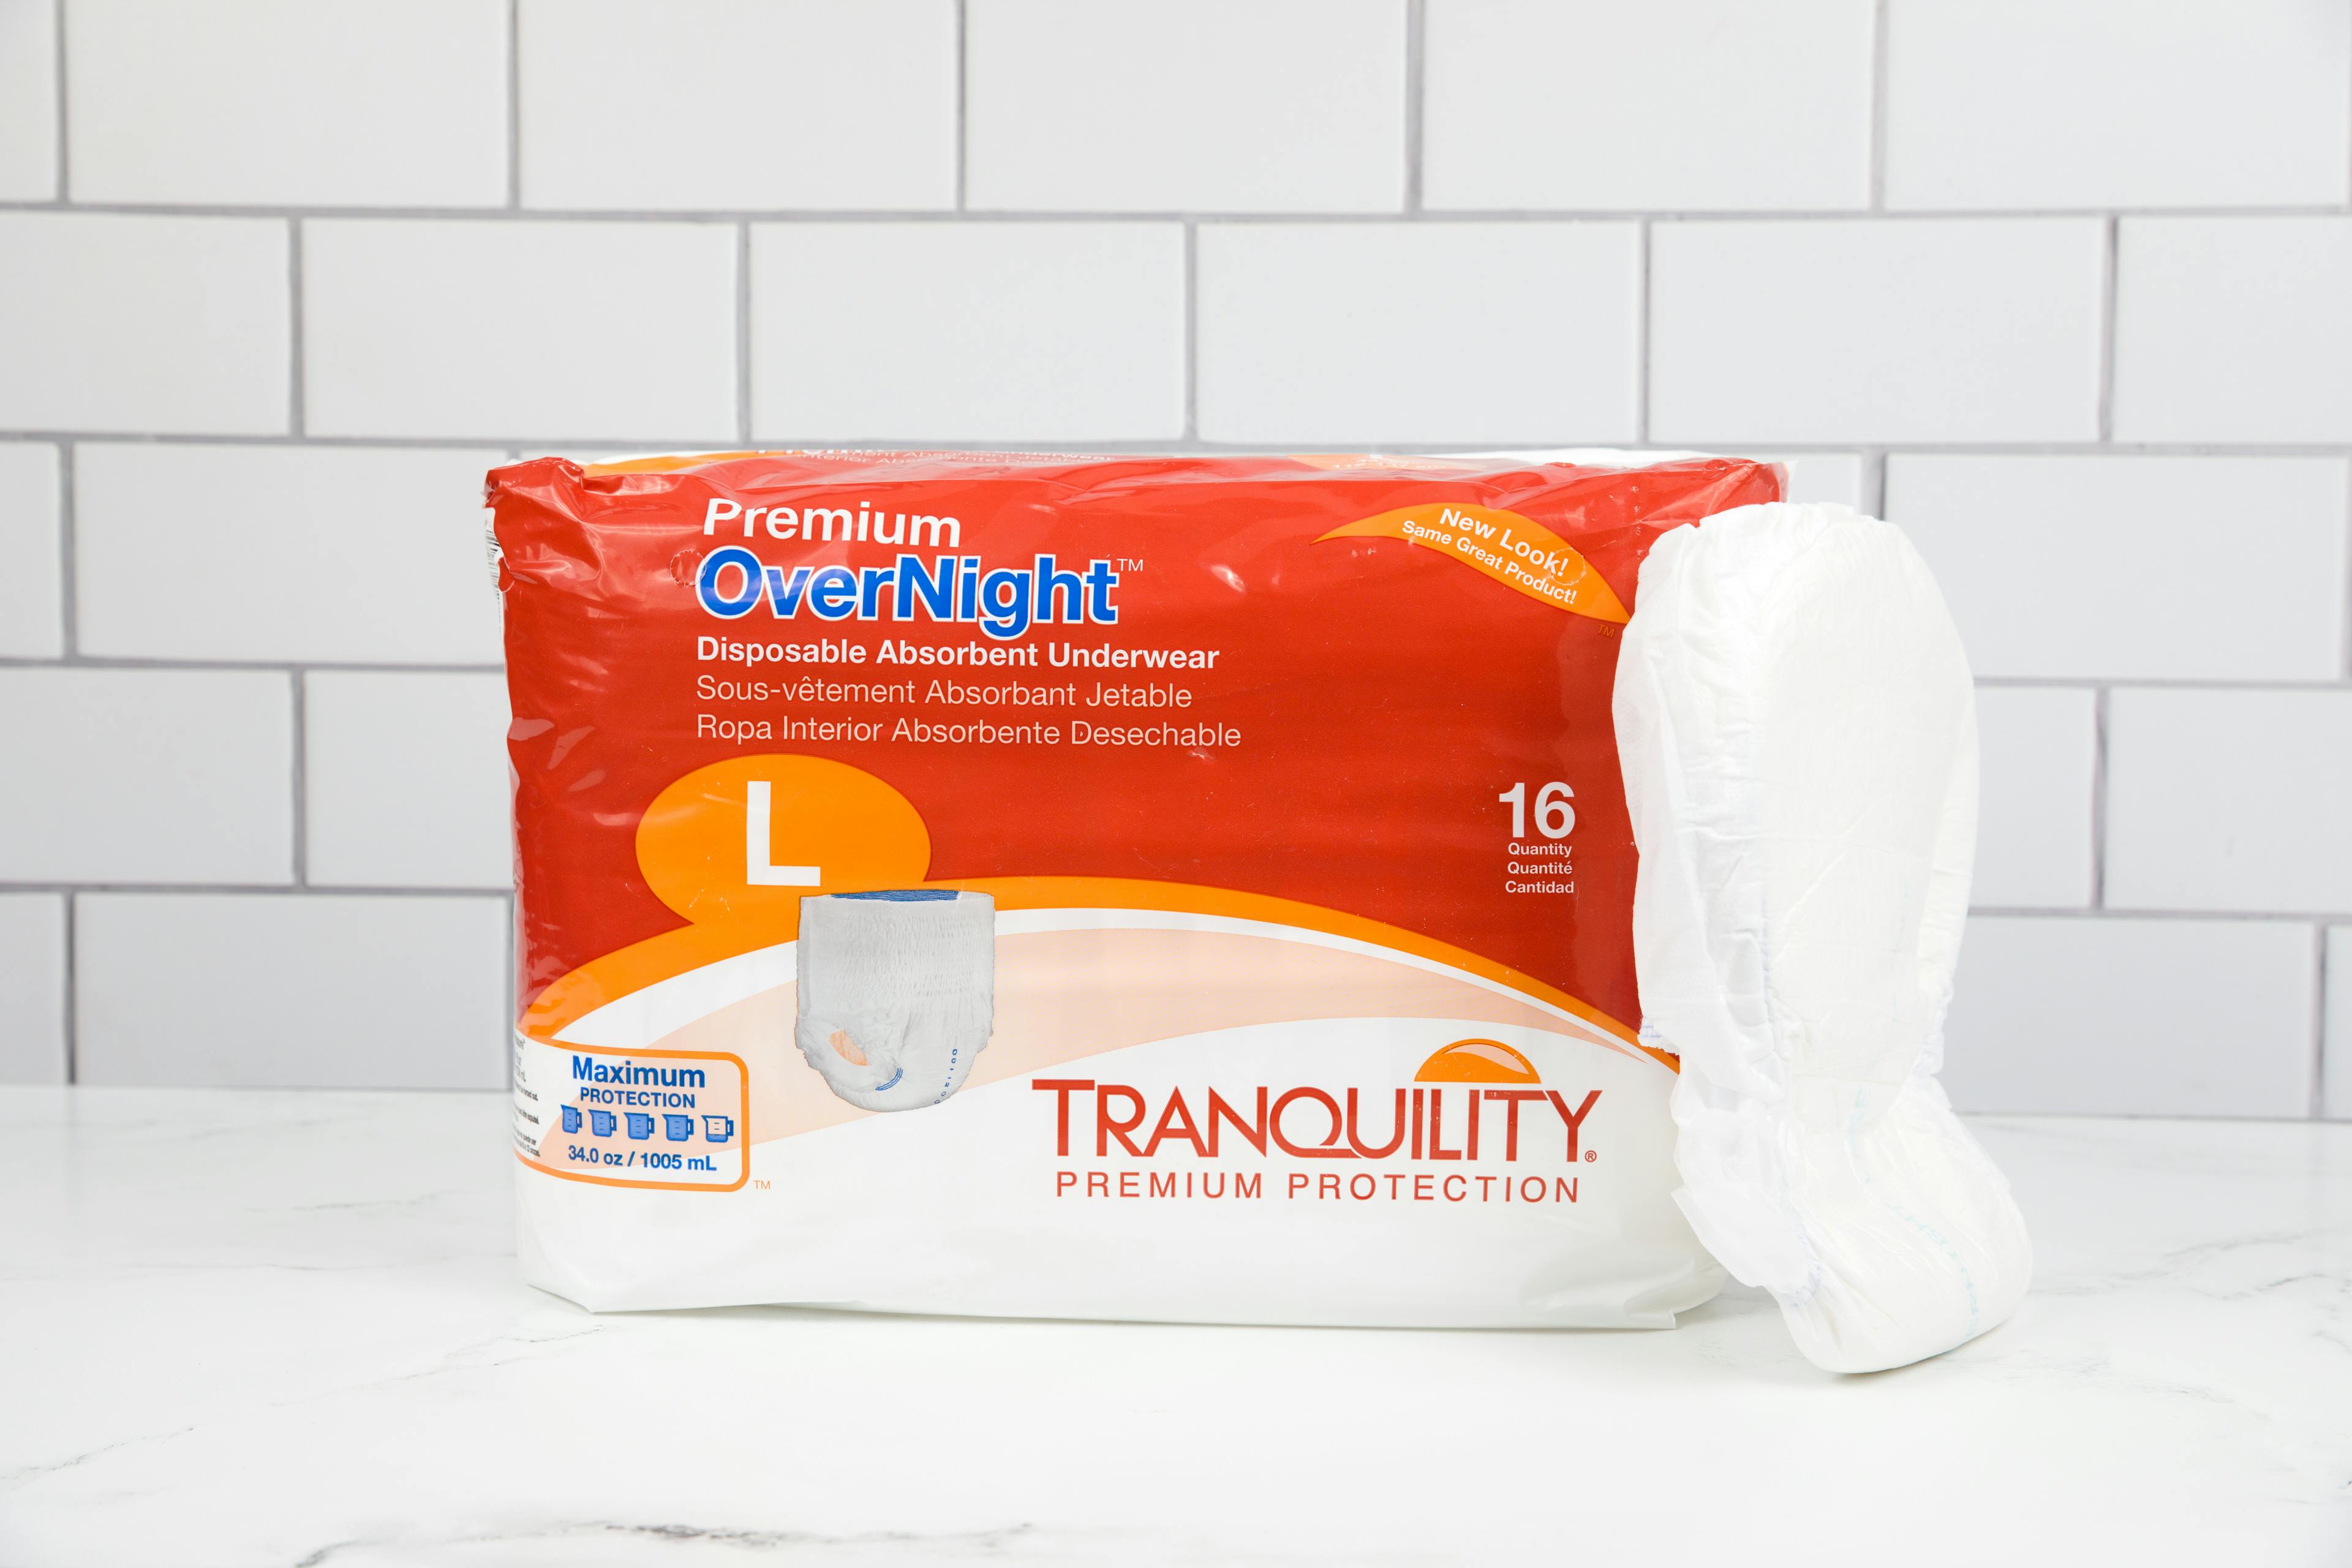 Tranquility Brand Review: What to Know Before You Buy